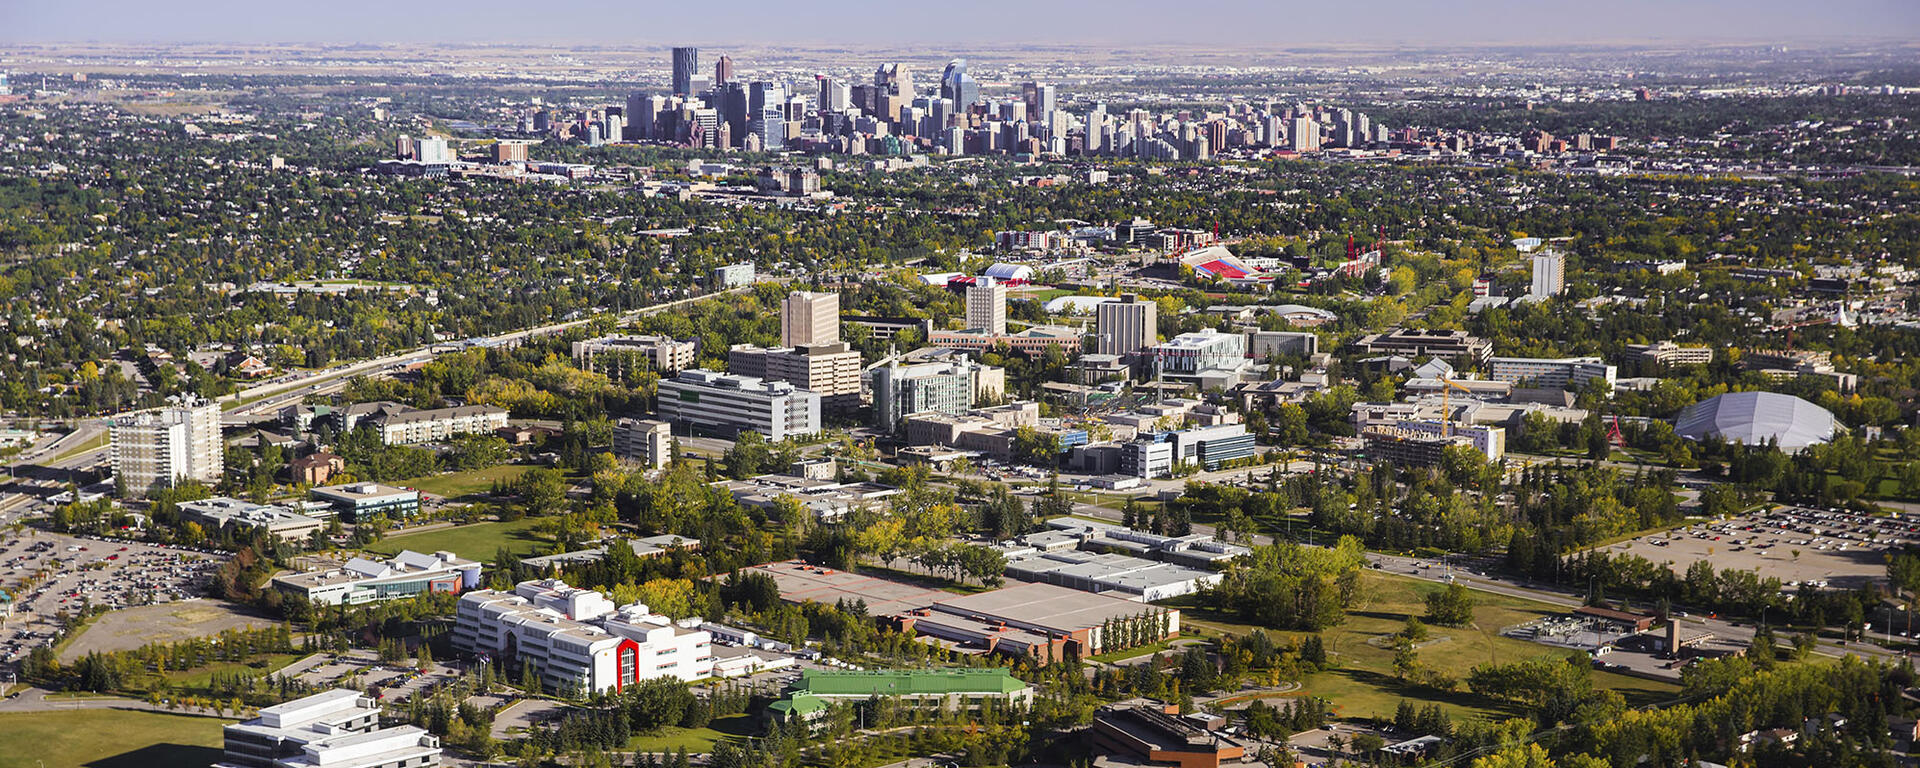 University of Calgary aerial photo of campus with Downtown Calgary in the background